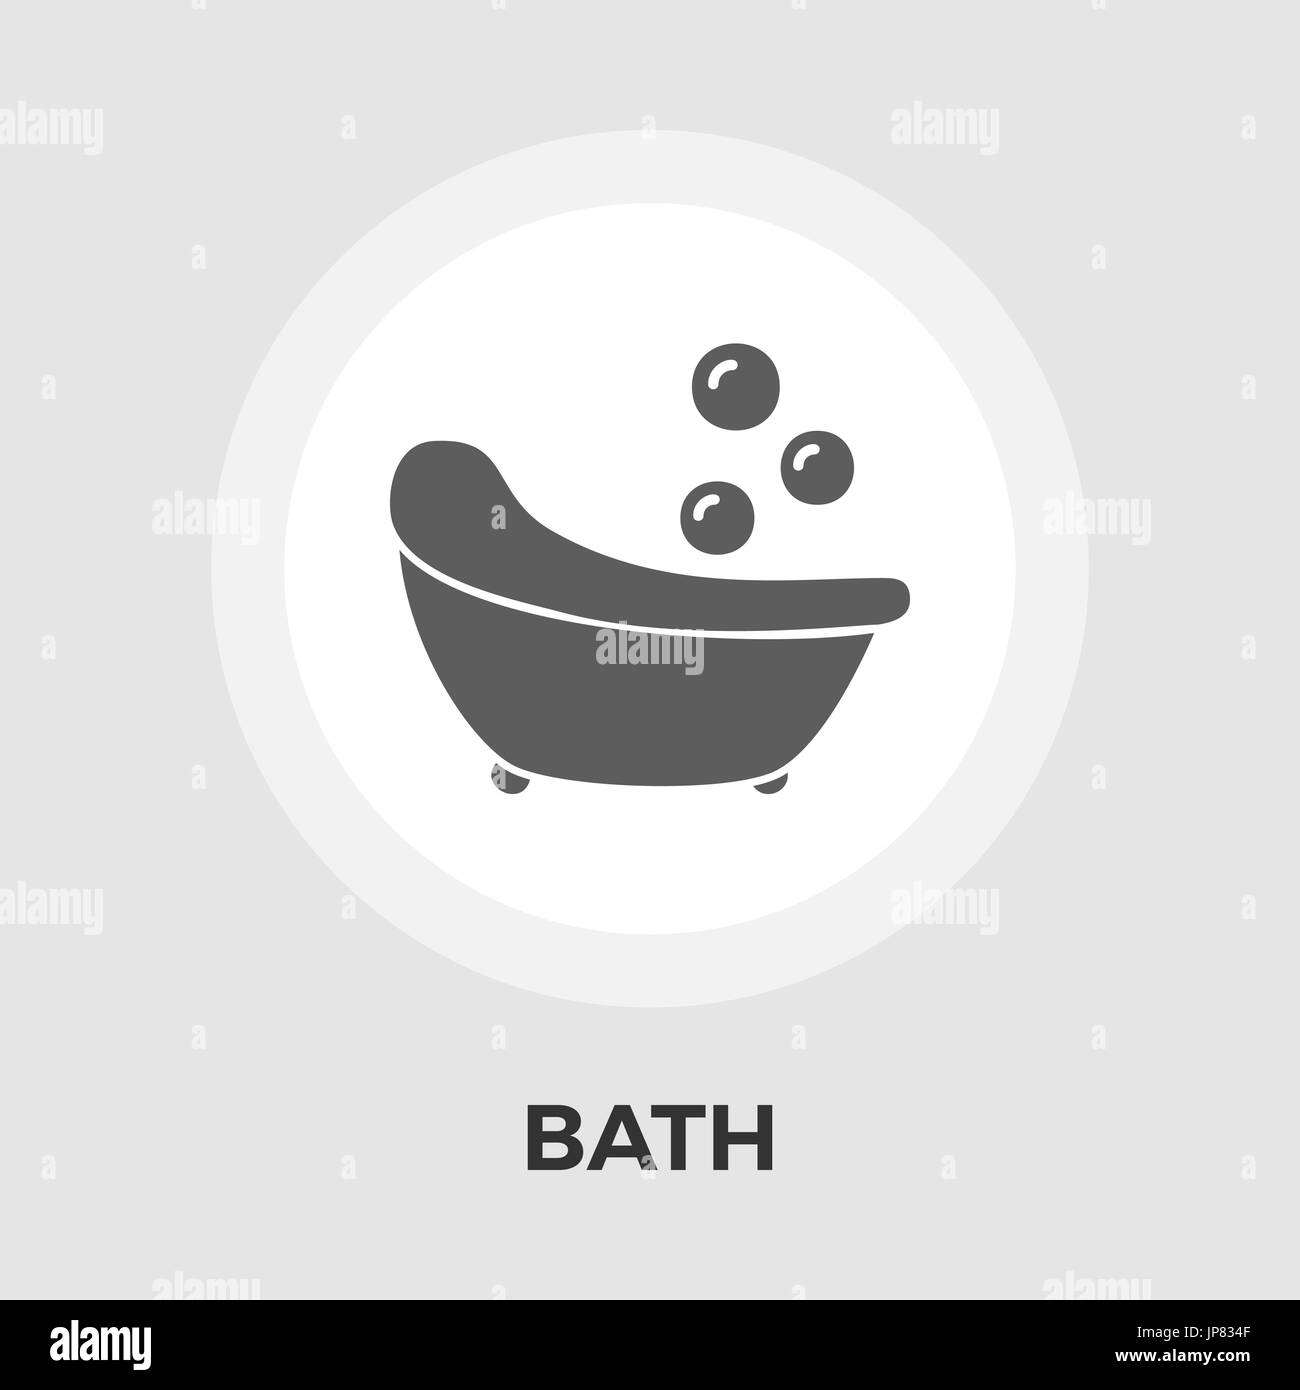 Bath Icon Vector. Flat icon isolated on the white background. Editable EPS file. Vector illustration. Stock Vector